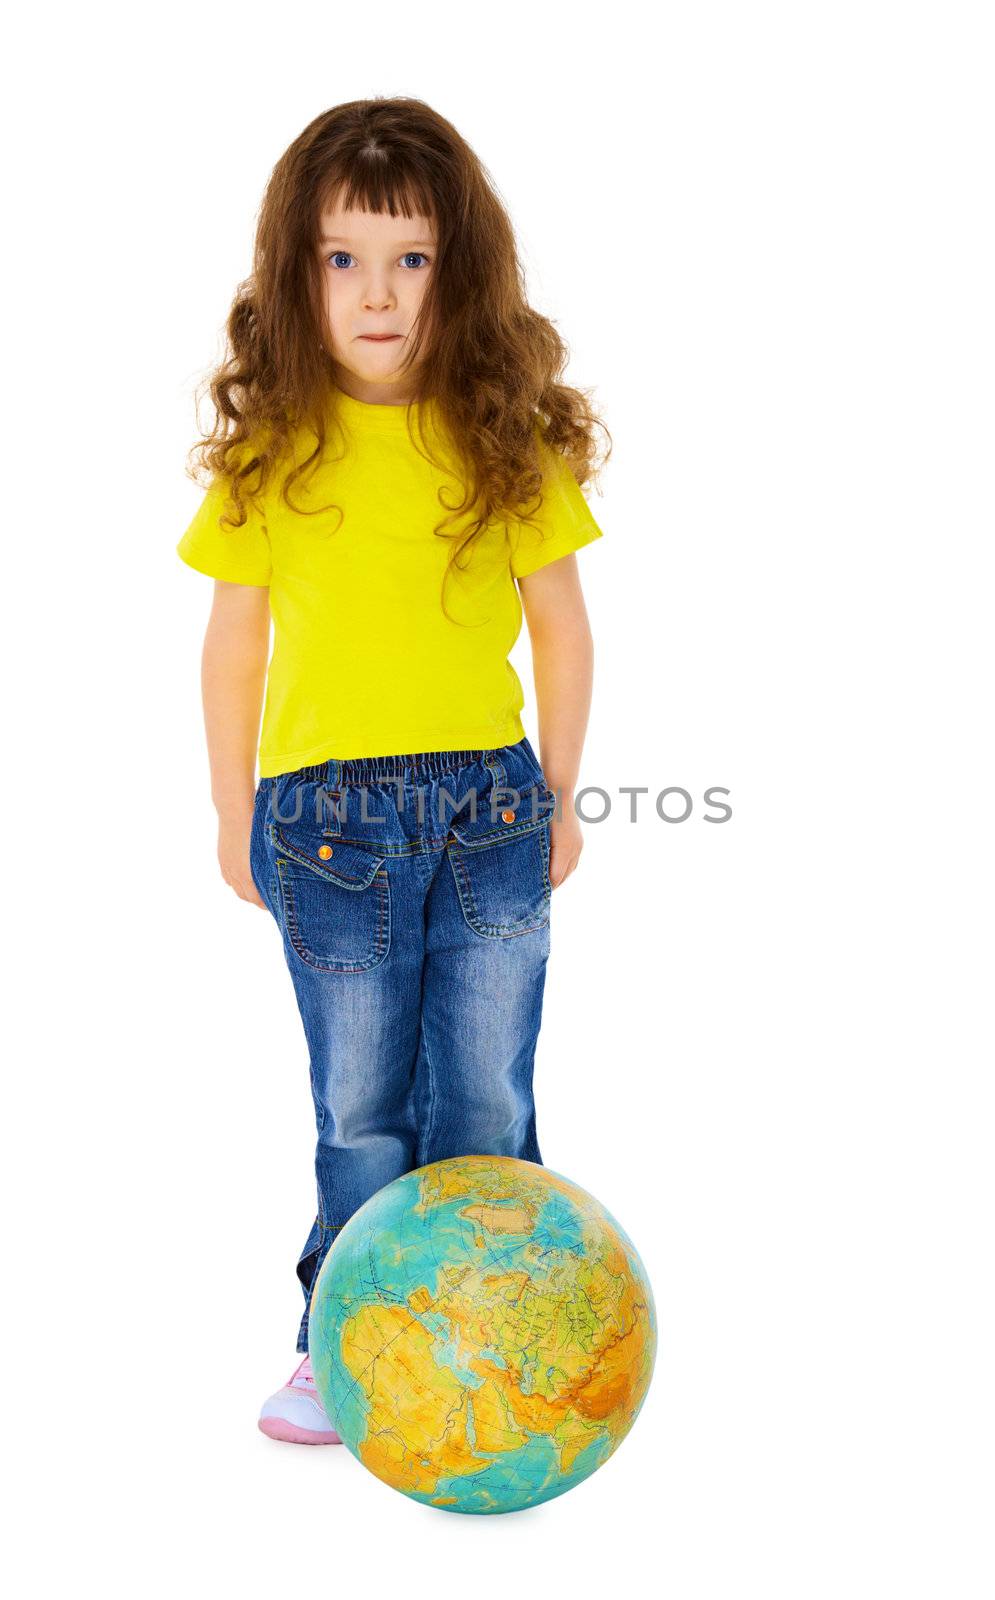 Funny girl with a globe like a soccer ball by pzaxe